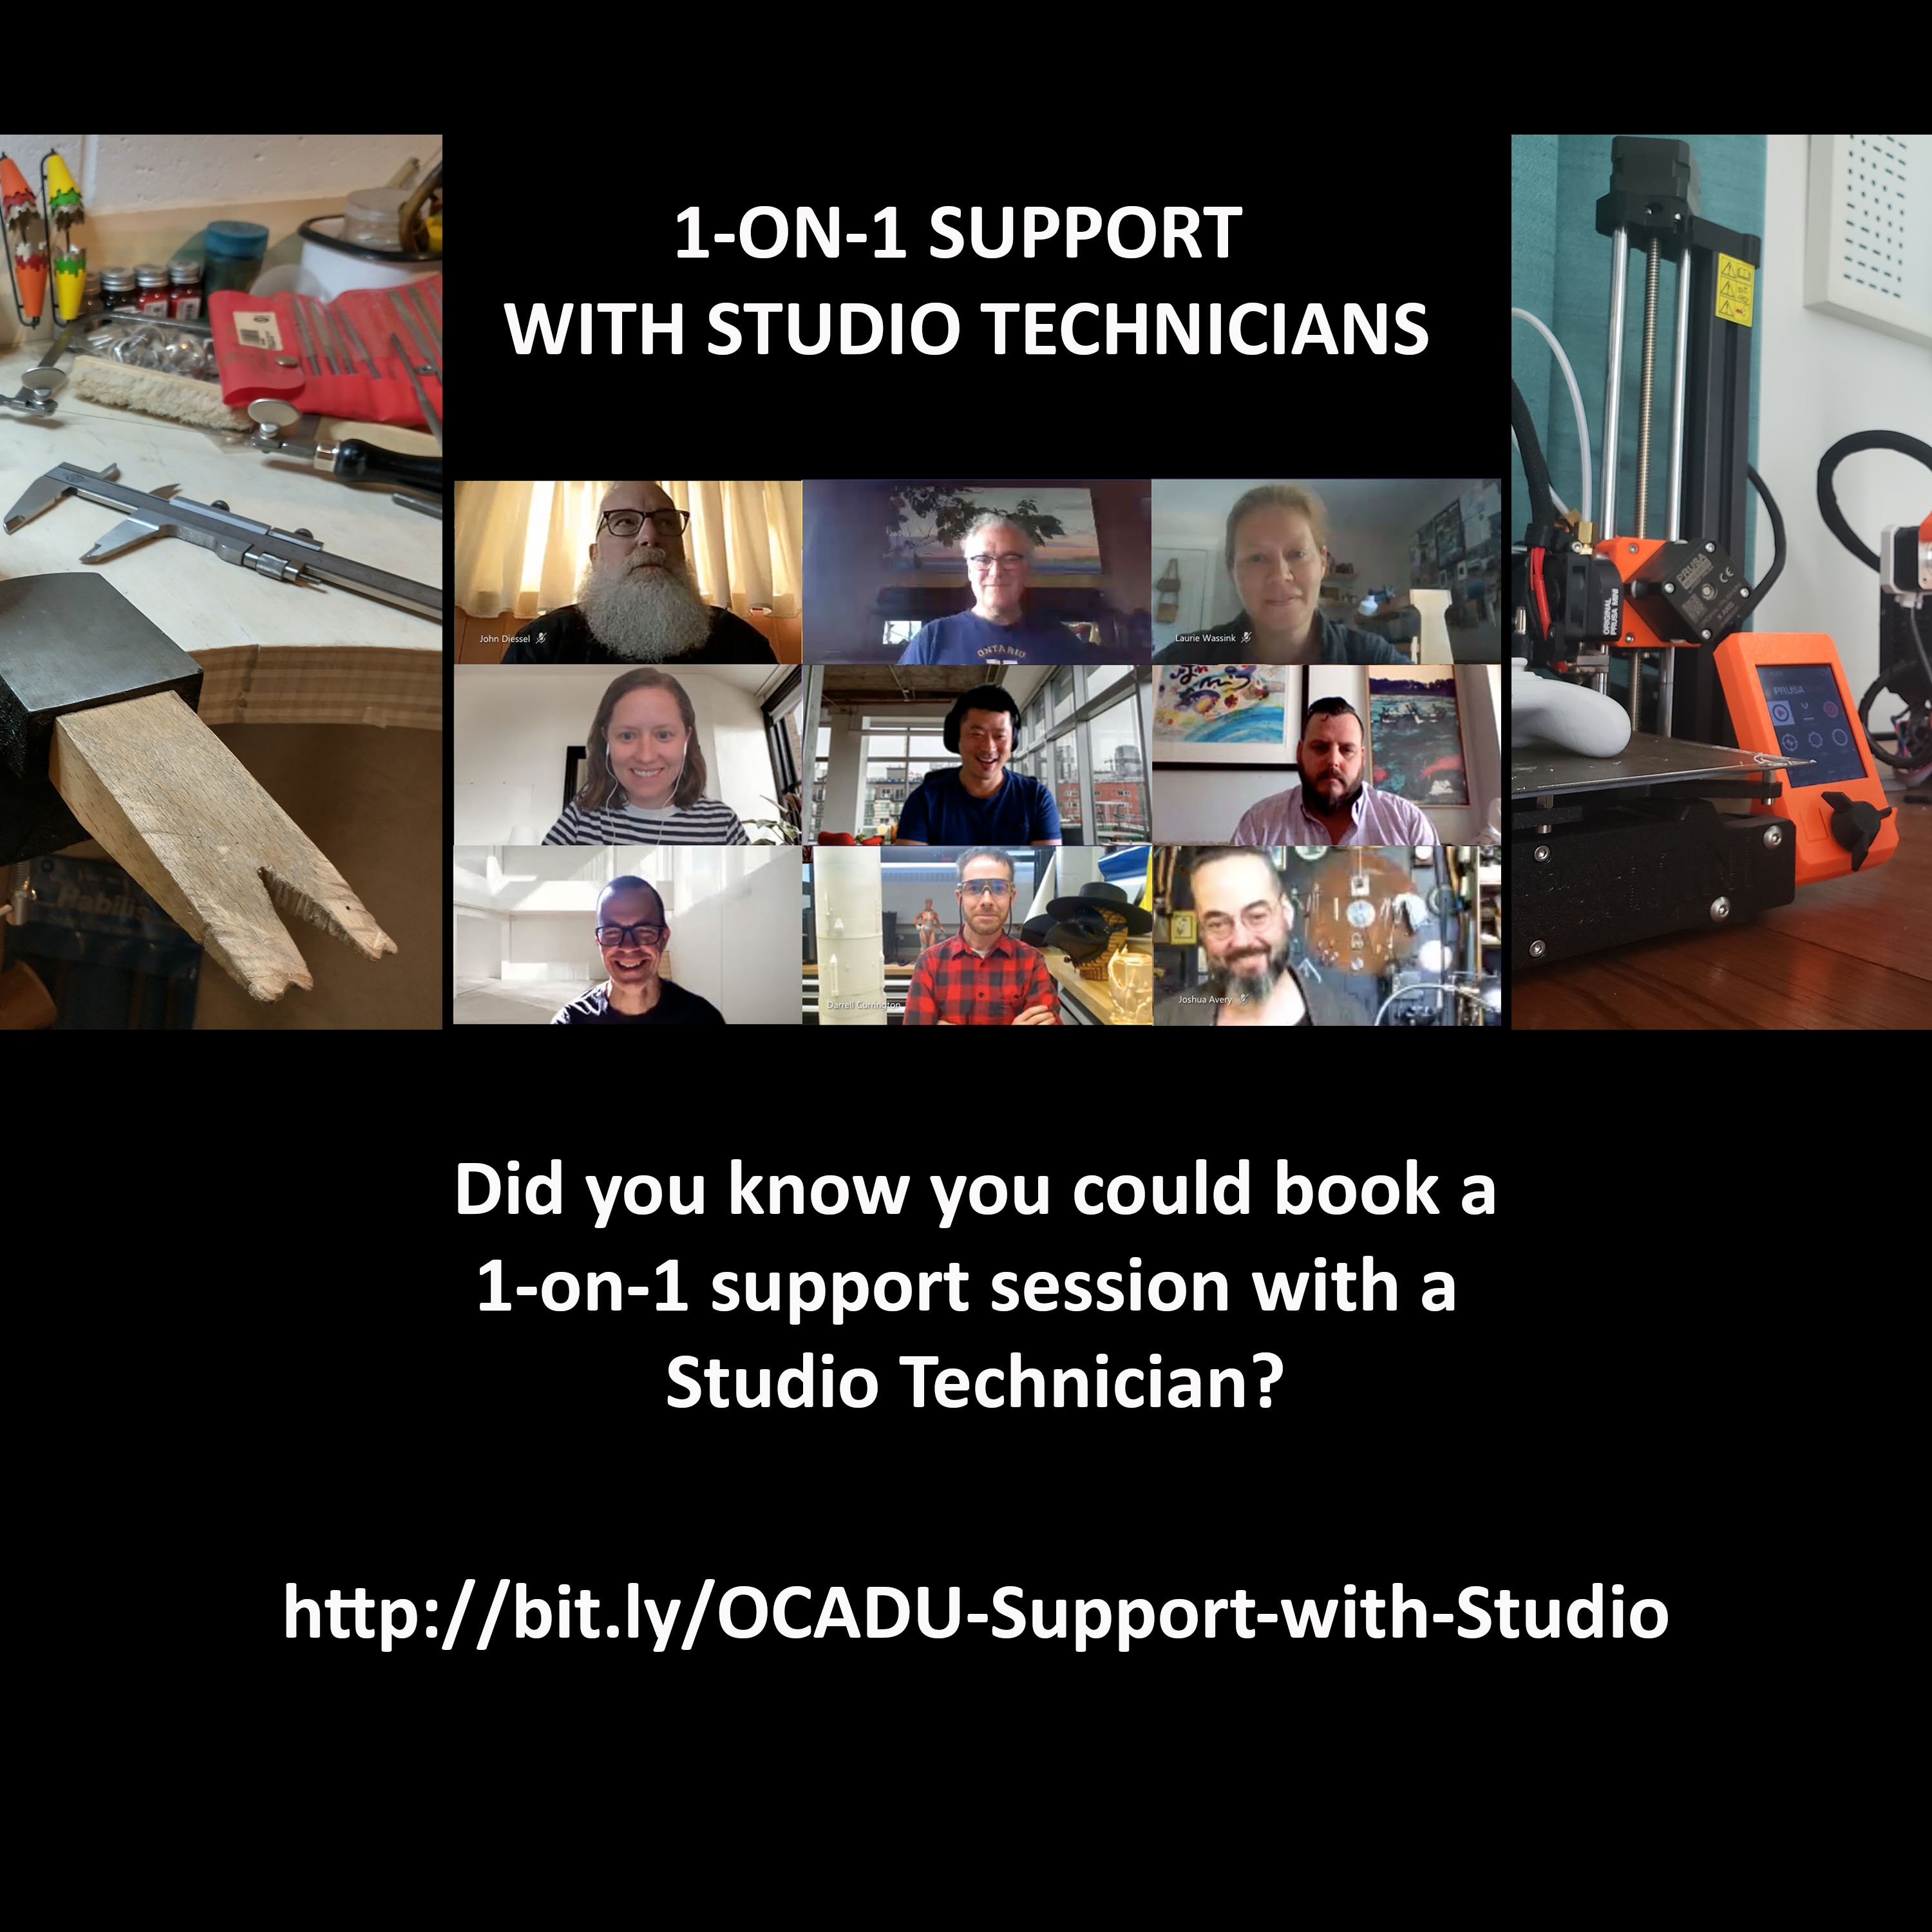 a poster with two workspaces and a screen shot of a group of studio technicians